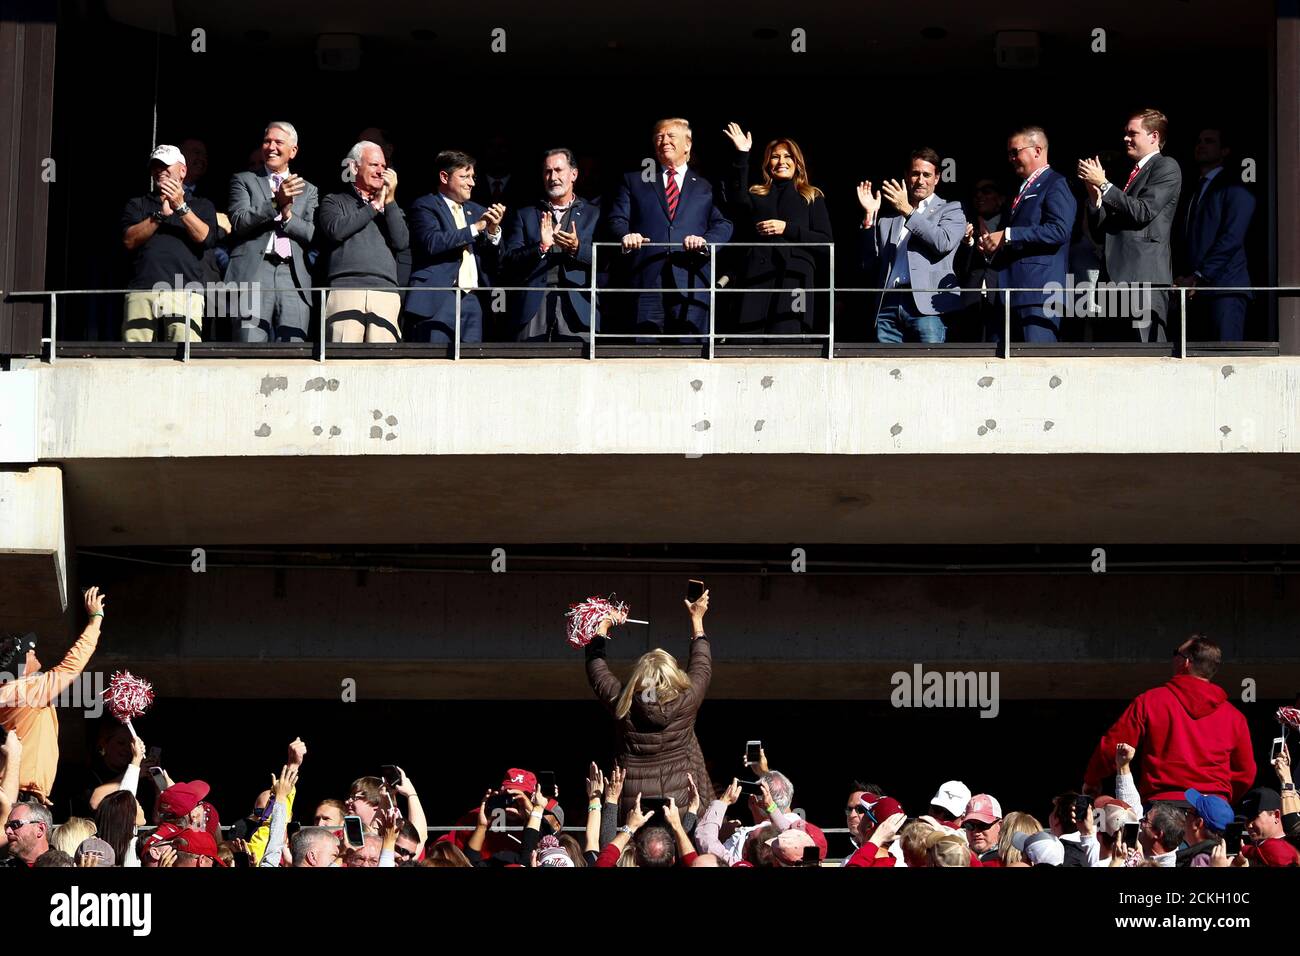 U.S. President Donald Trump and first lady Melania Trump wave to the crowd during an N.C.A.A. Division I college football game between Louisiana State University and University of Alabama at Bryant-Denny Stadium in Tuscaloosa, Alabama, U.S., November 9, 2019. REUTERS/Tom Brenner Stock Photo